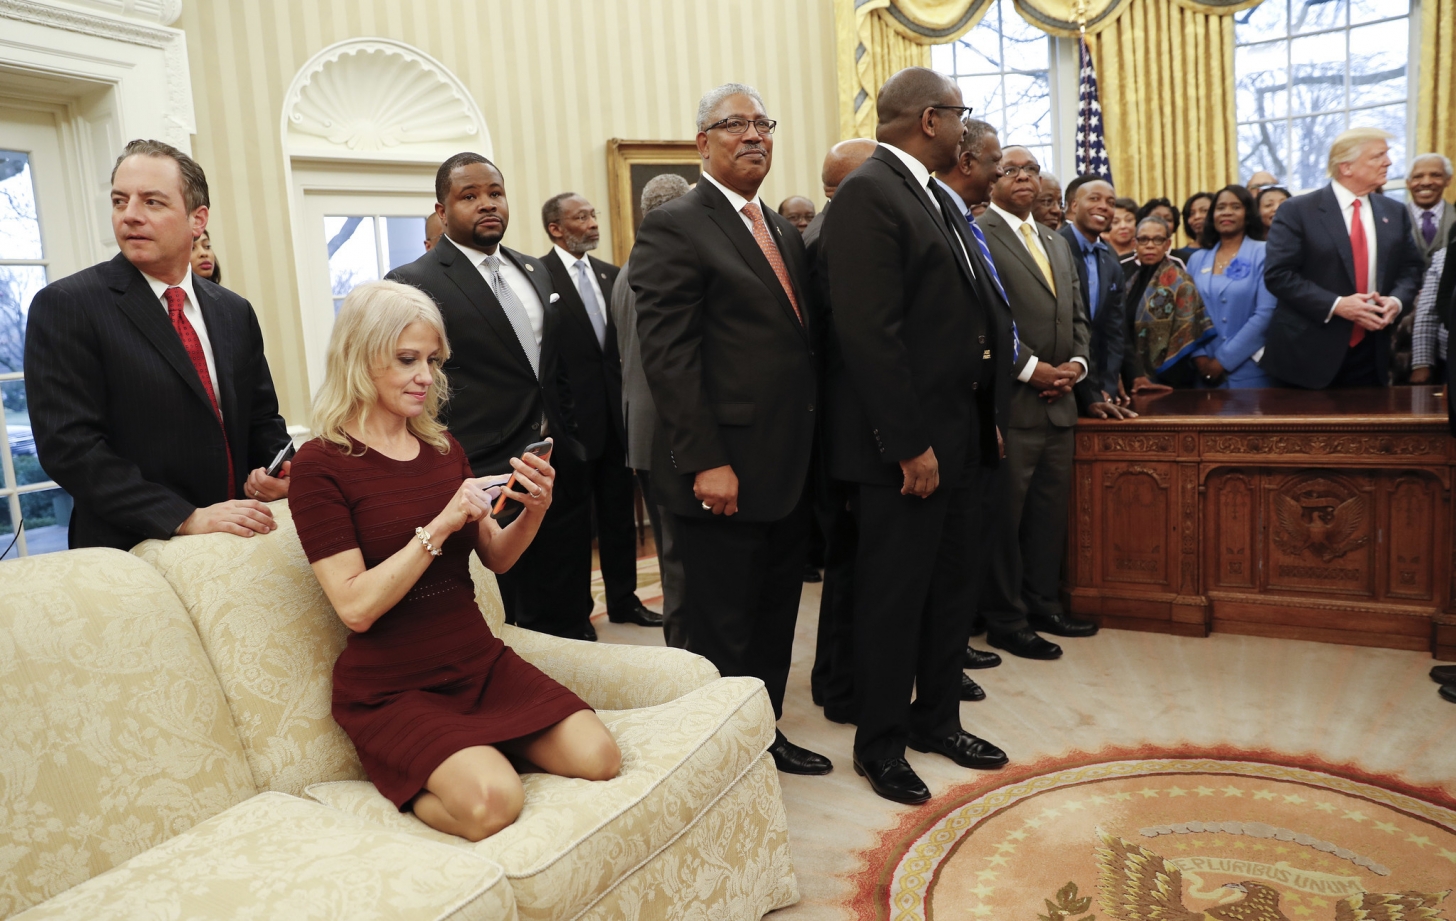 My thoughts on Kellyanne Conway having her feet on the couch